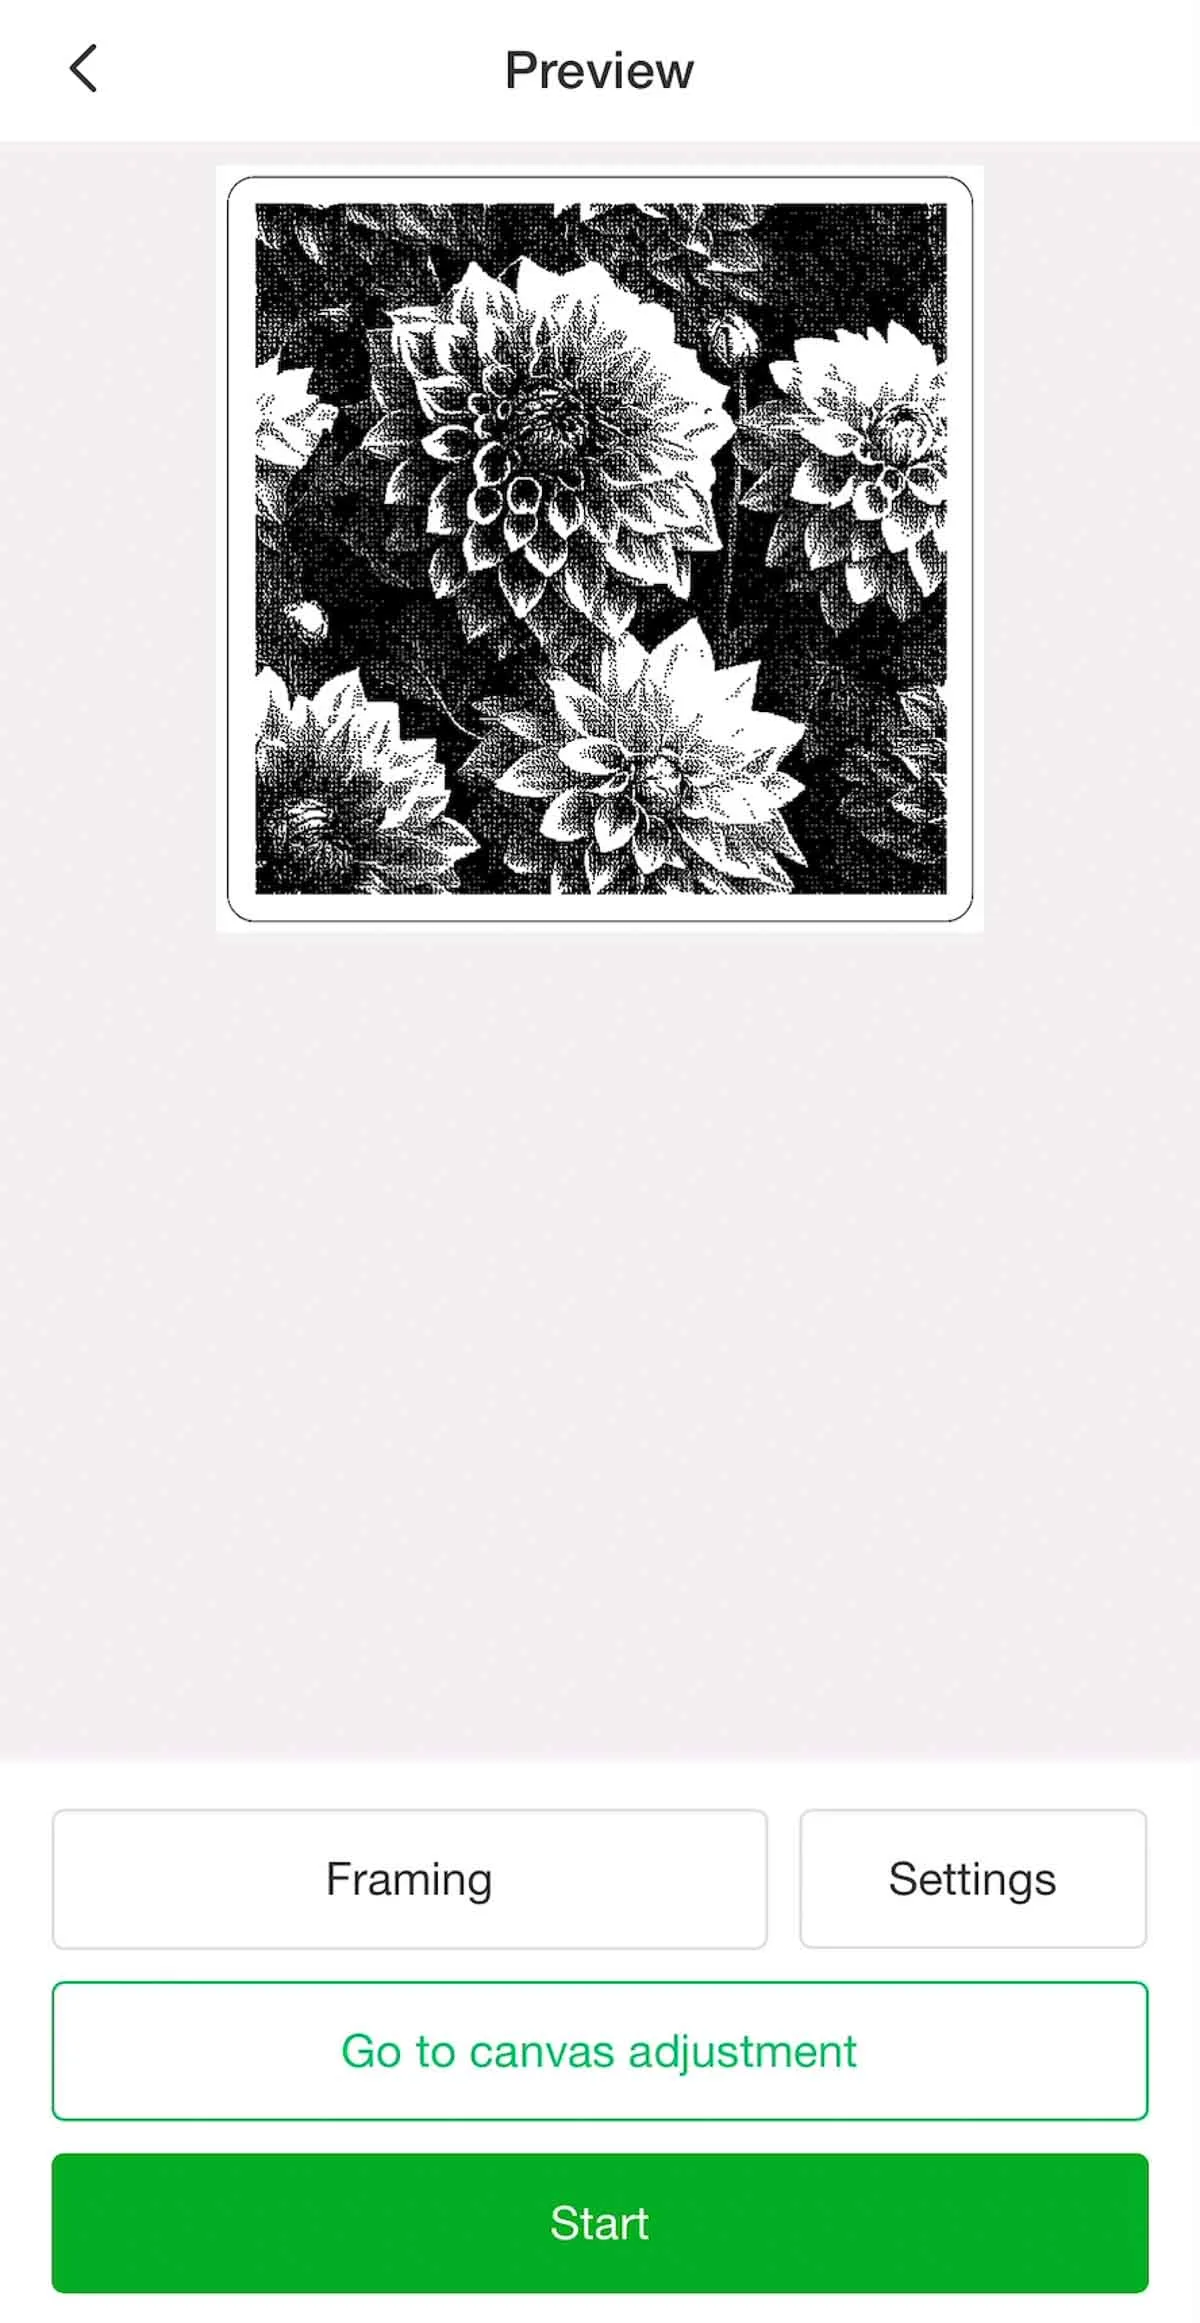 Selecting start button to engrave Dahlia pictures.